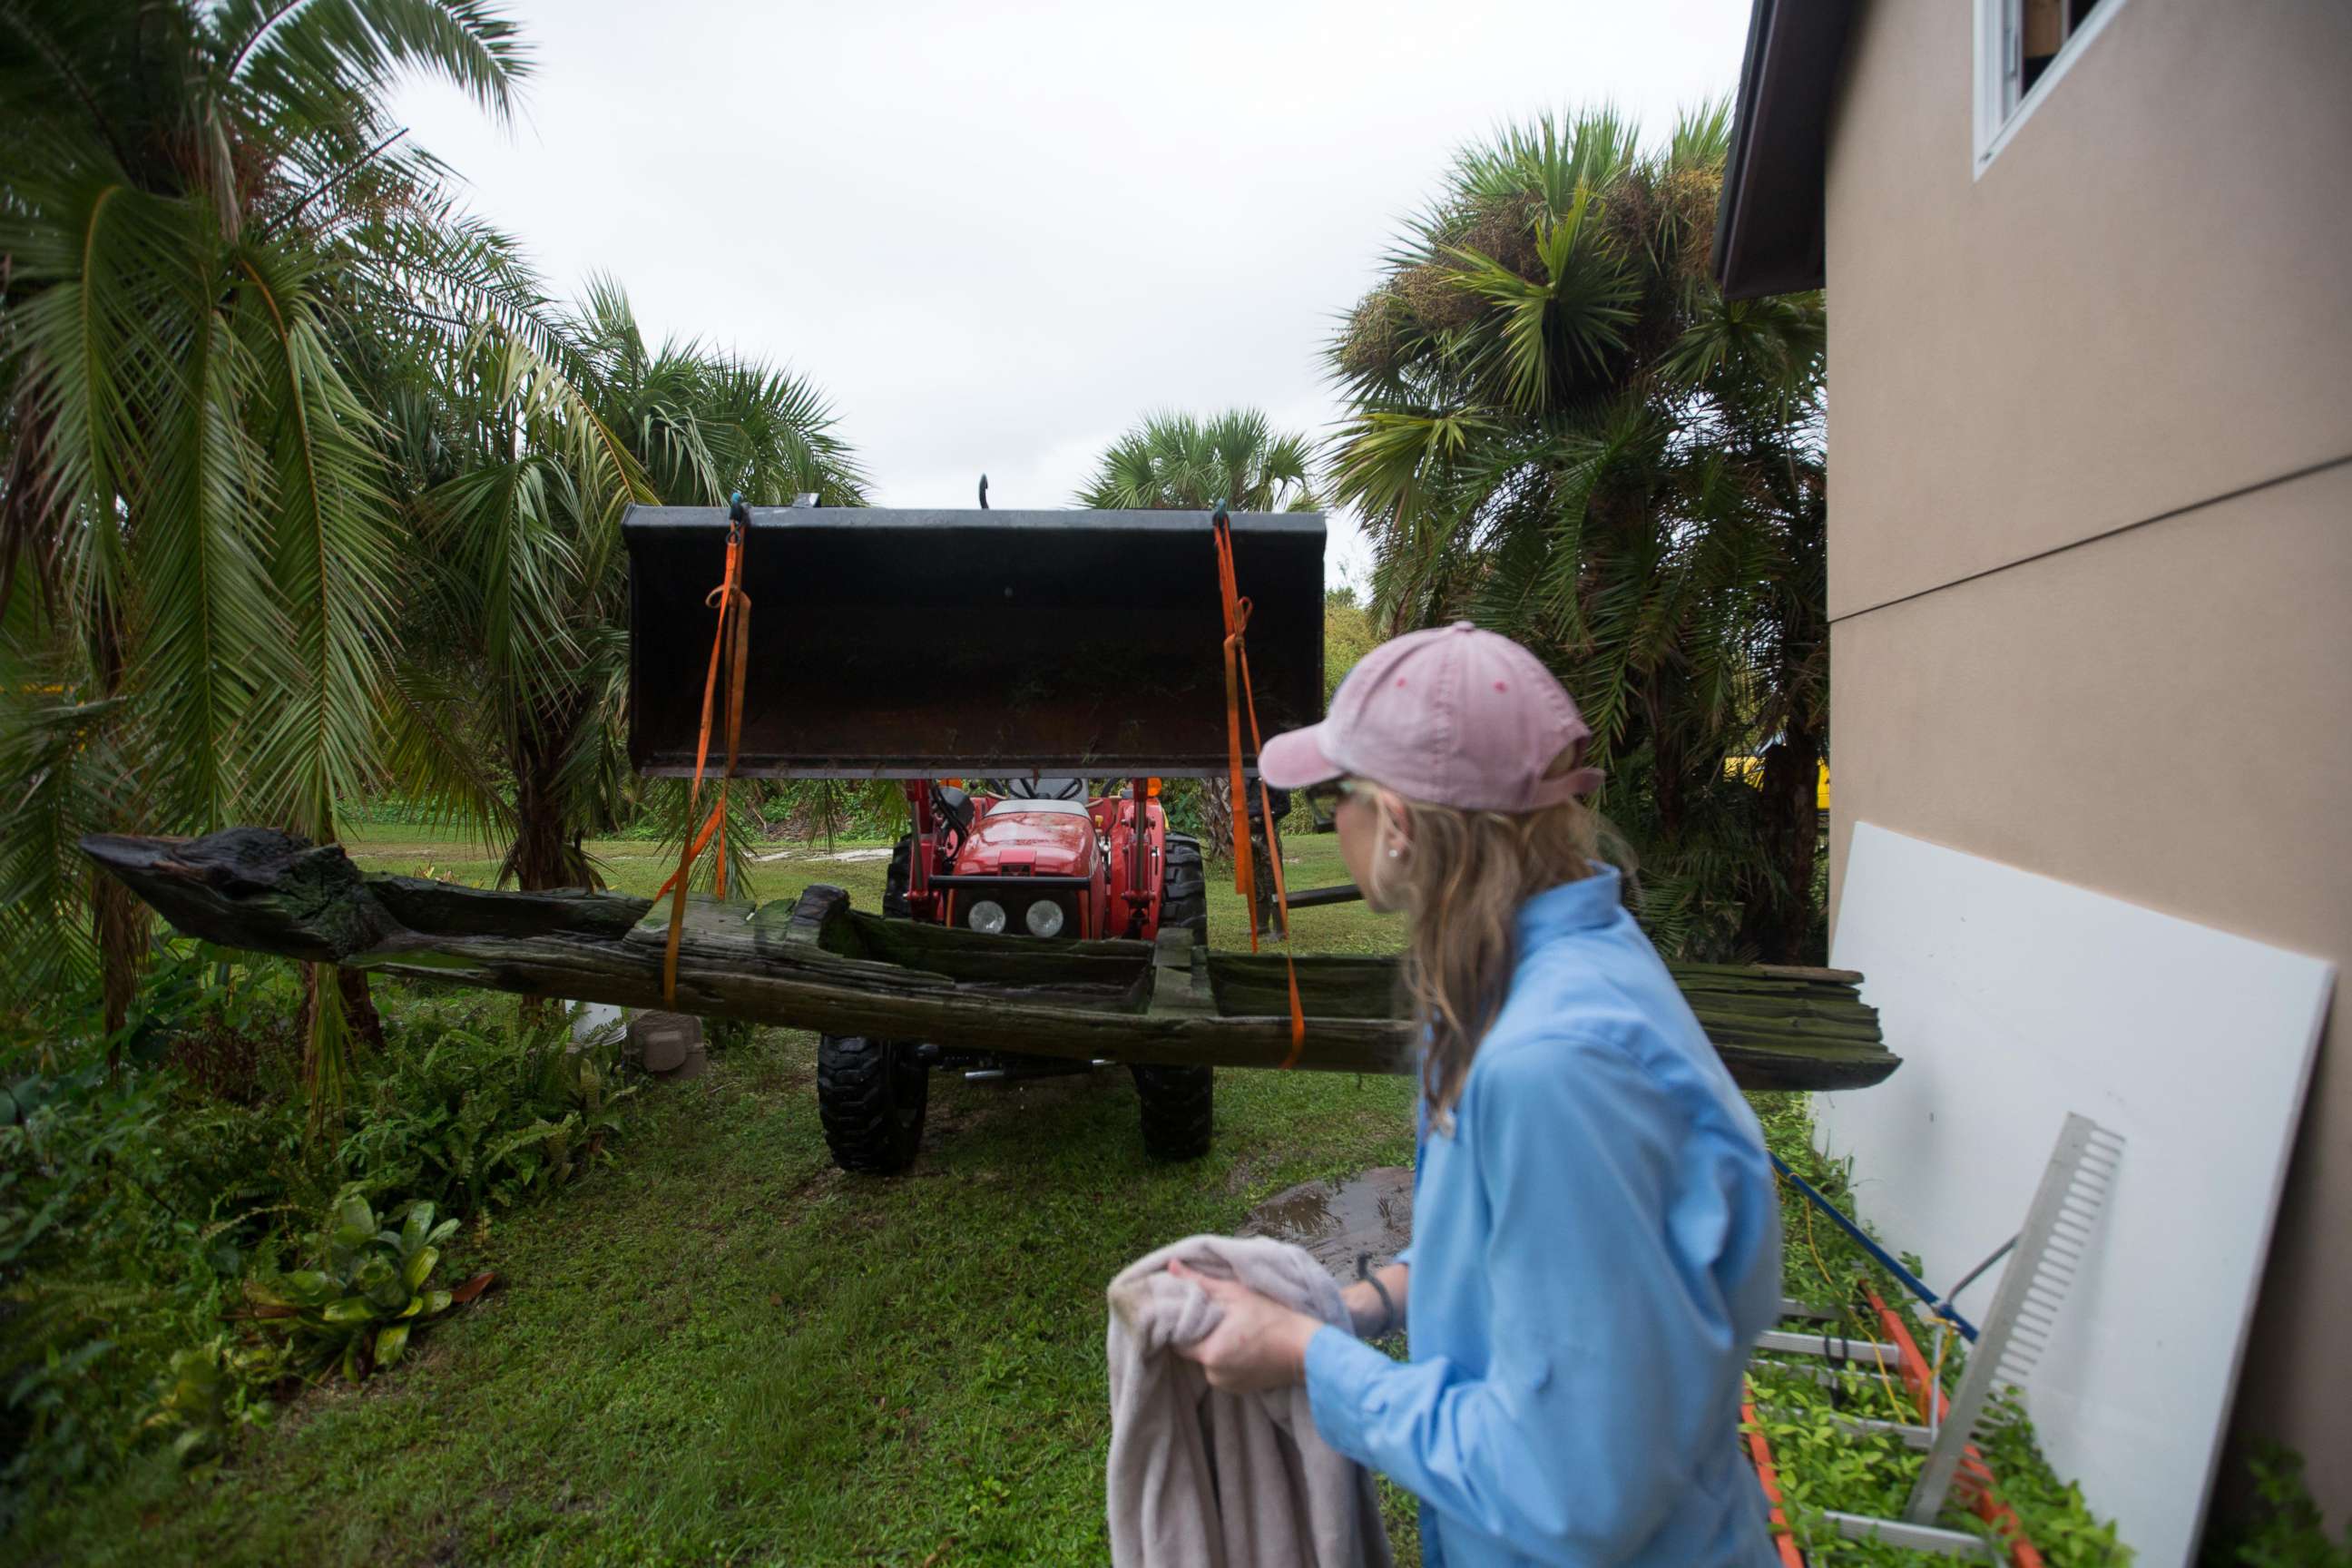 PHOTO: The radiocarbon dating results for the canoe unearthed by Hurricane Irma returned a 50 percent probability the wood is from 1640 to 1680 A.D.